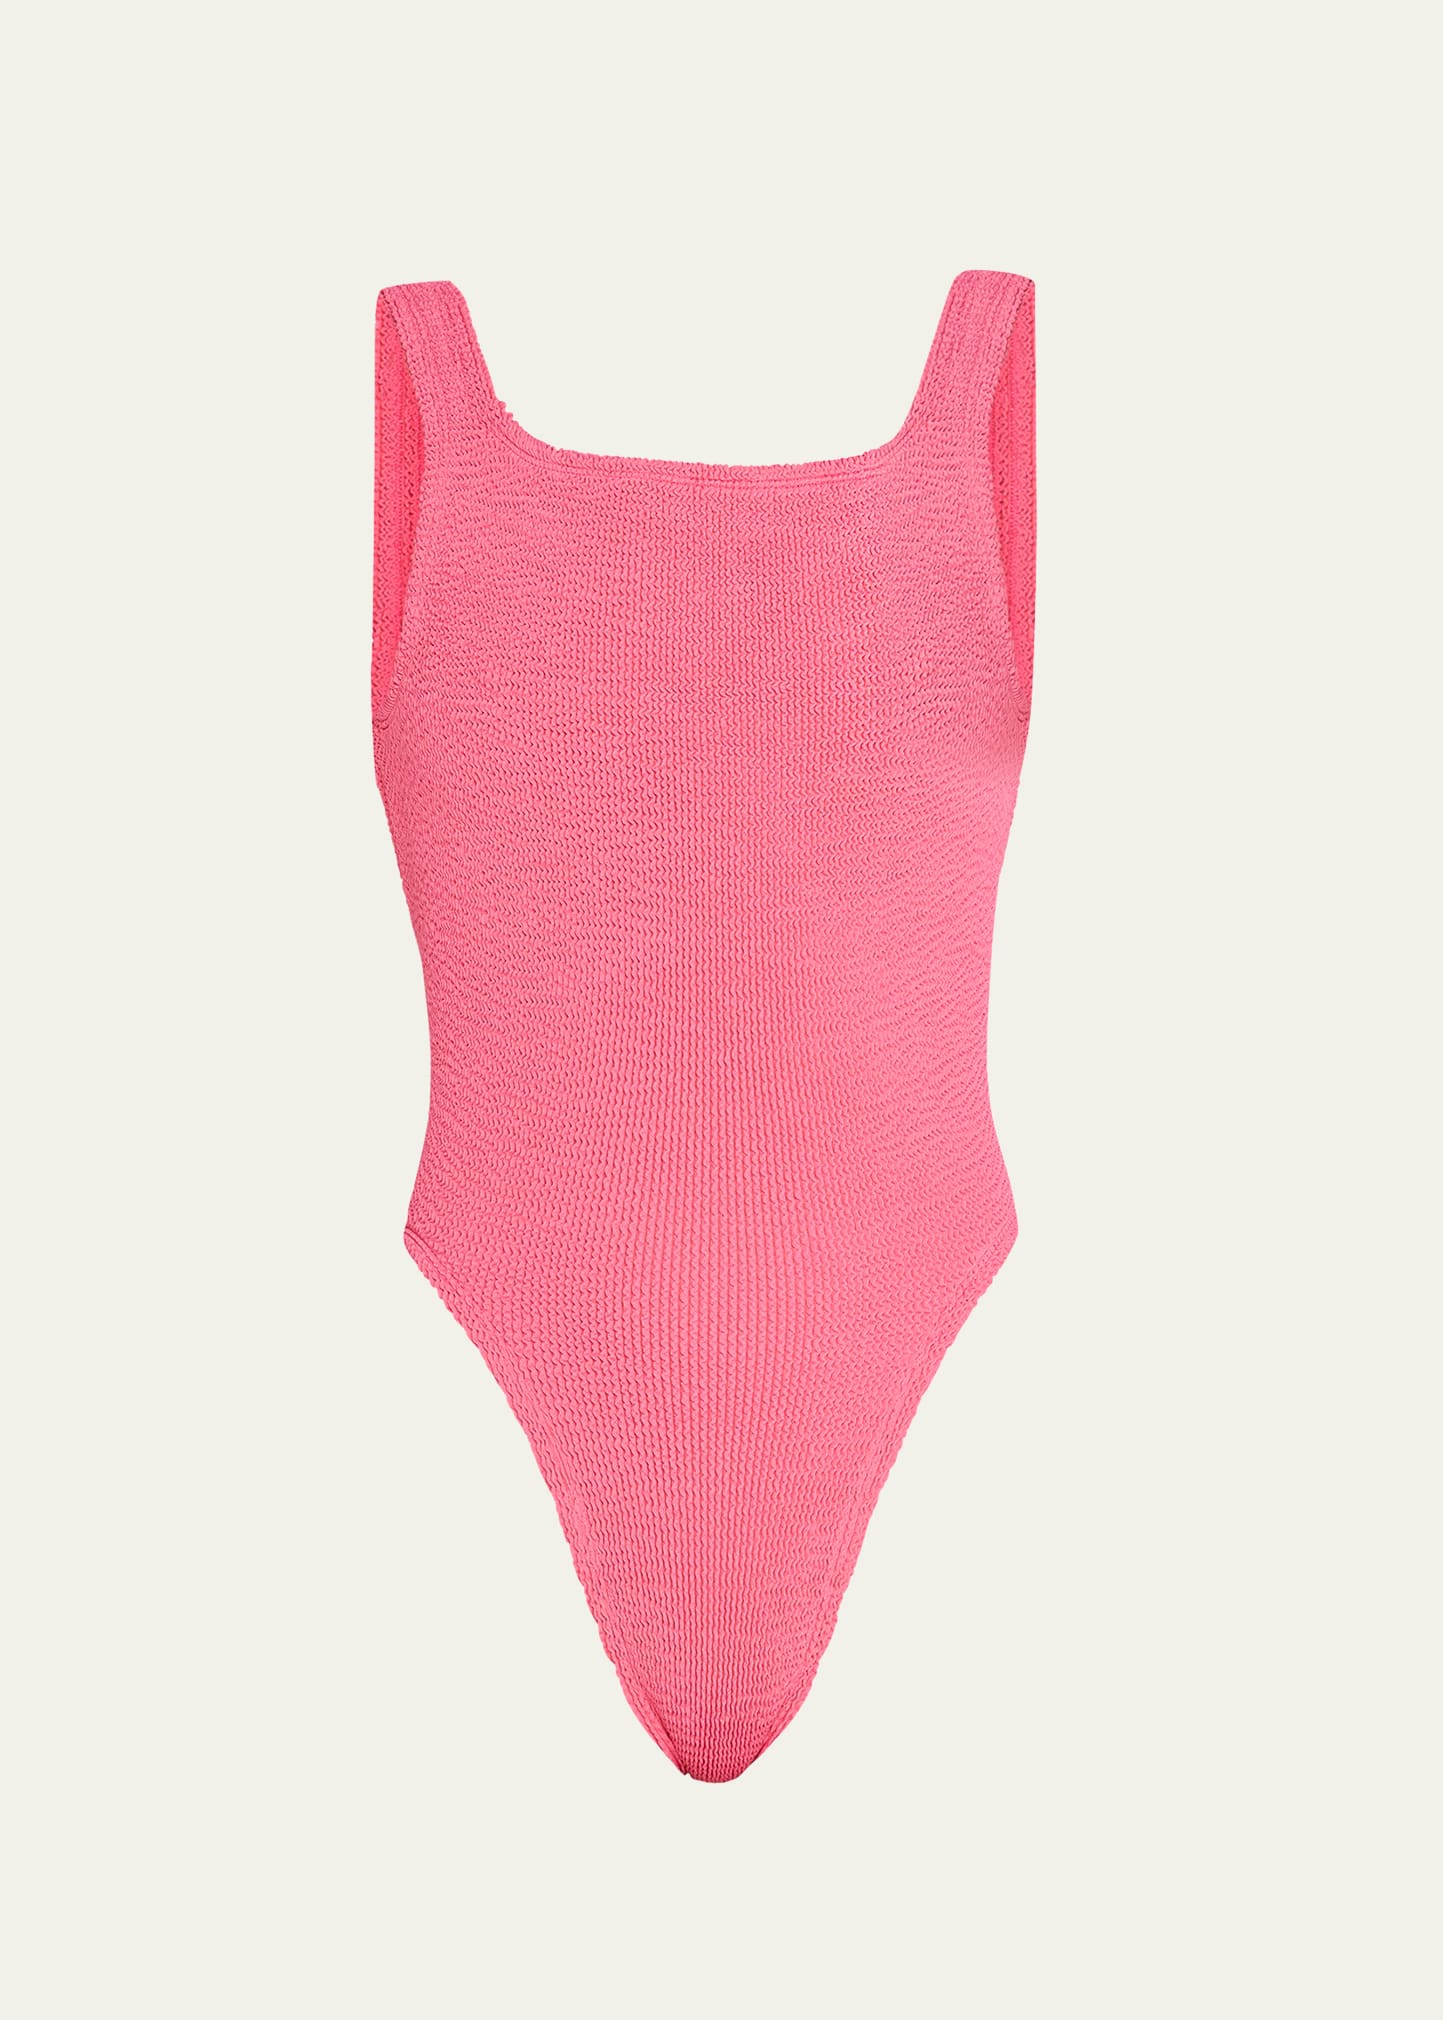 Hunza G Square-Neck High-Cut One-Piece Swimsuit